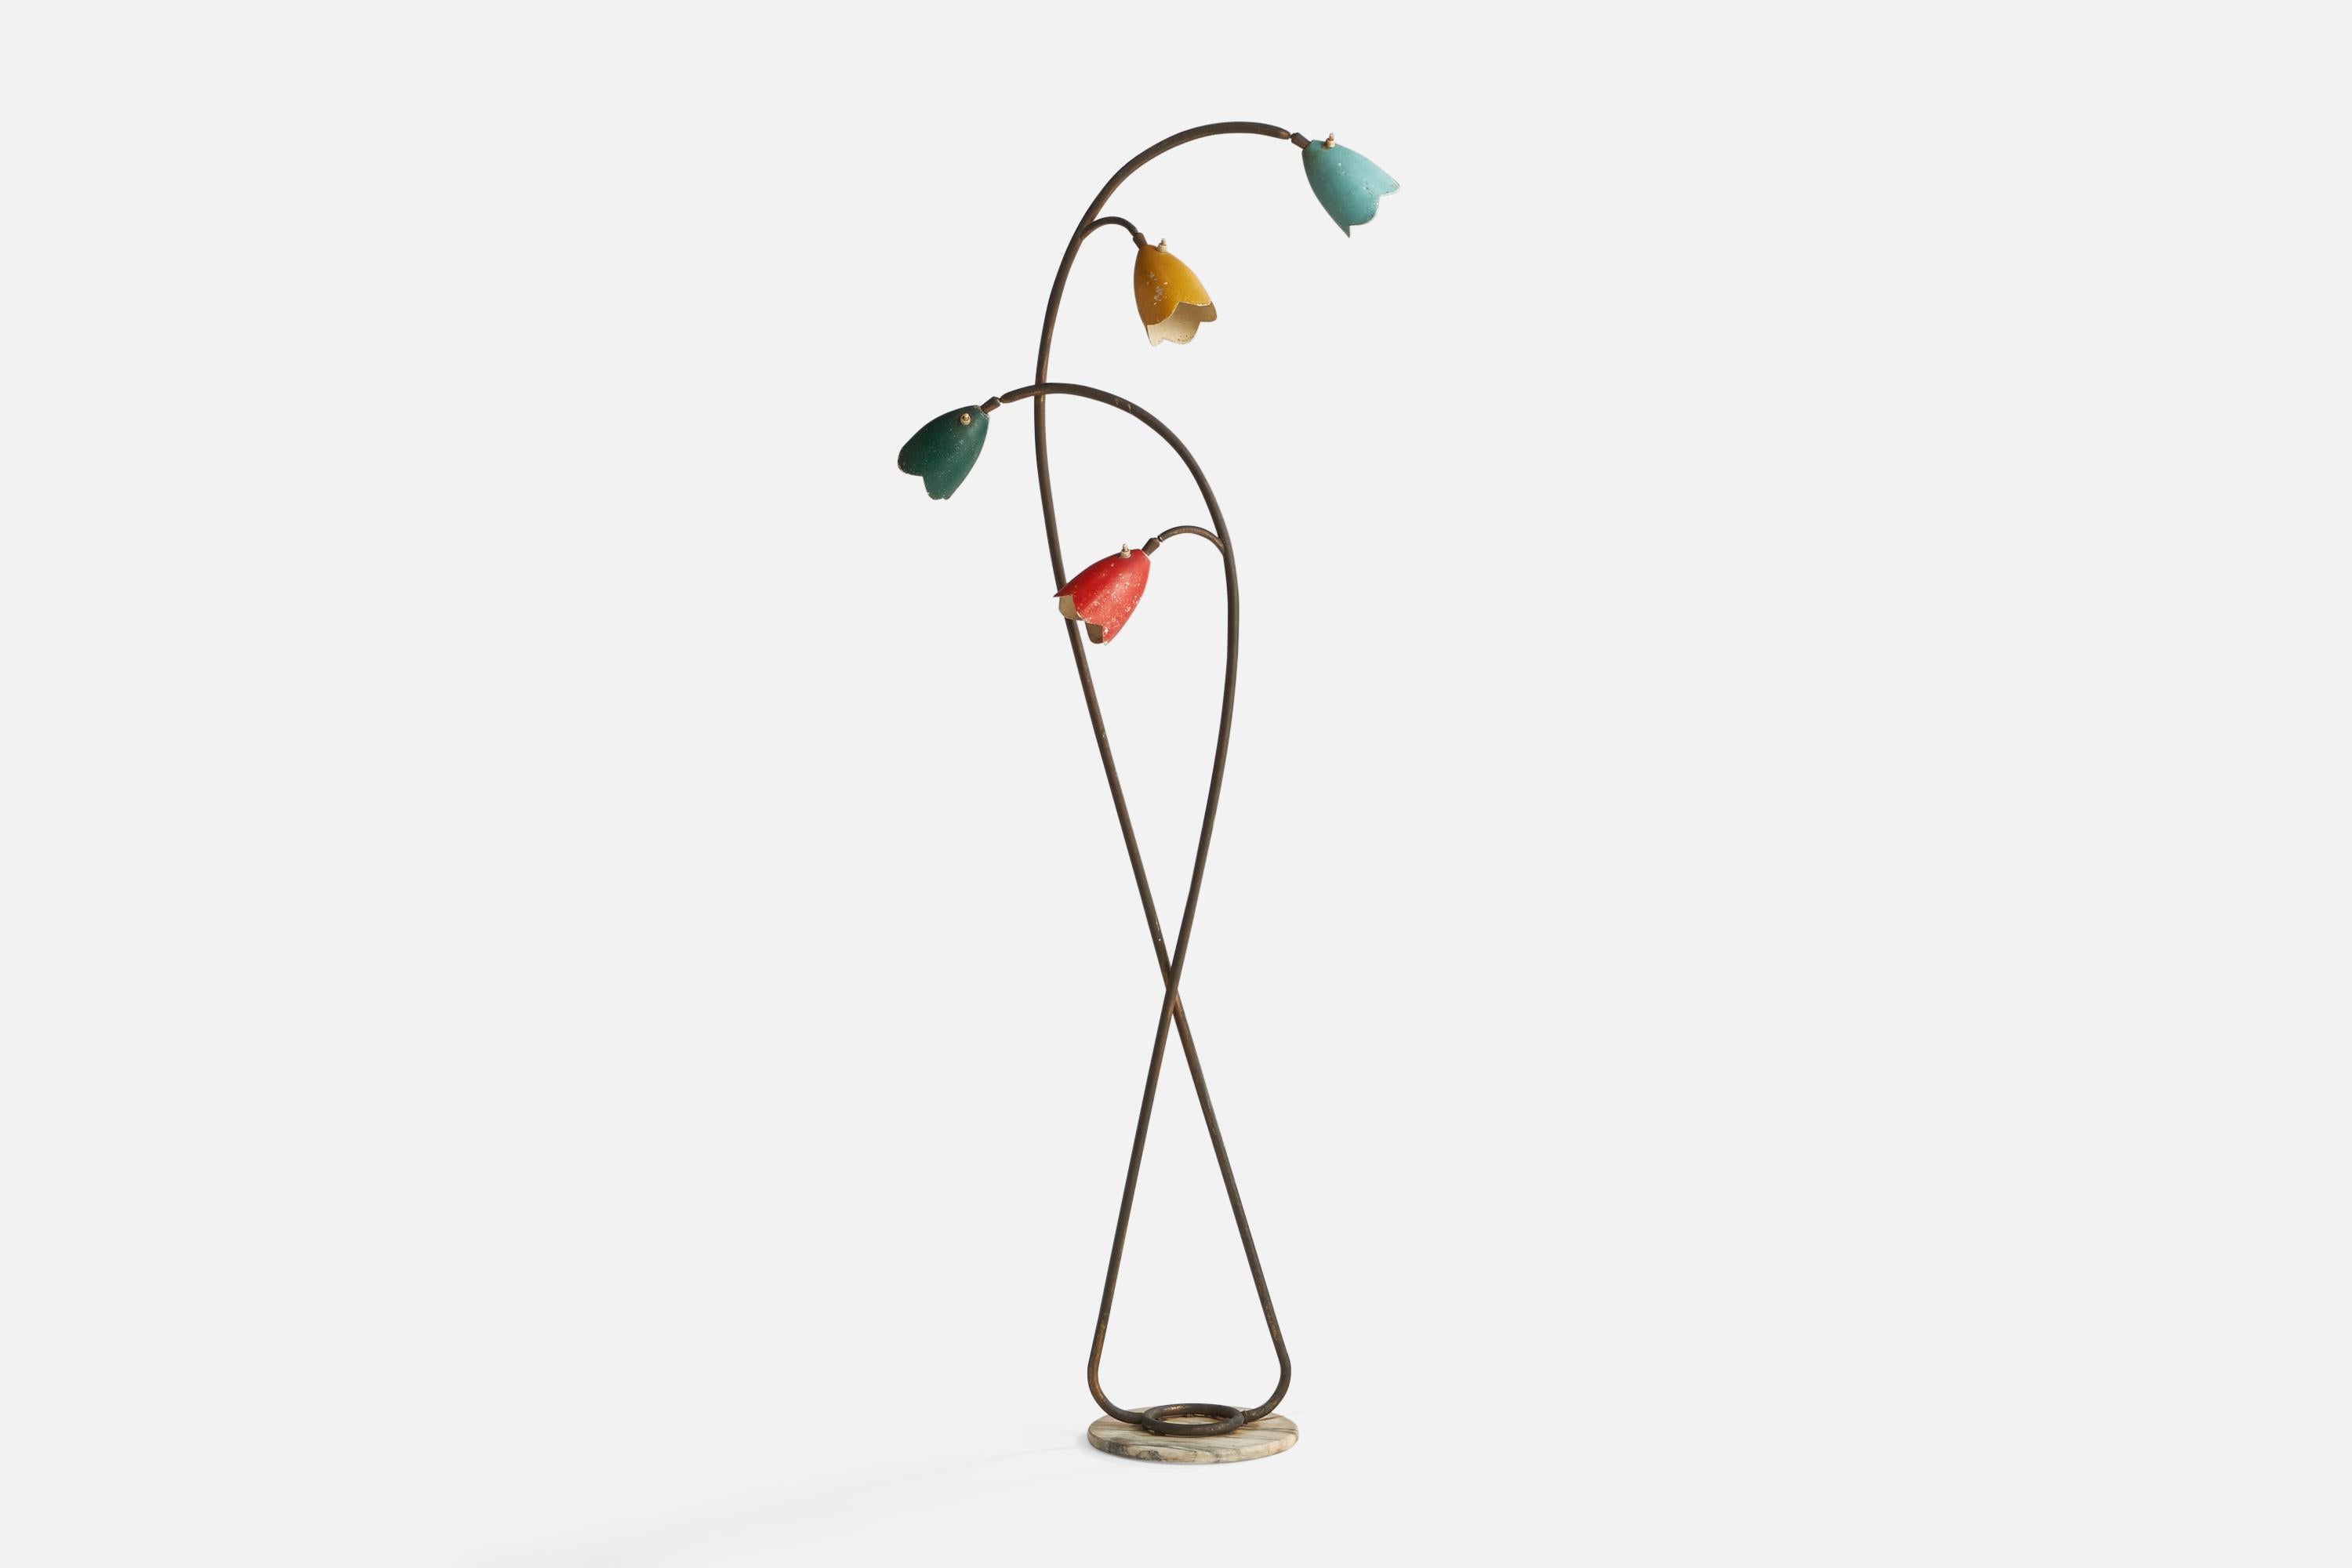 A four-armed brass, marble and red, green, blue and yellow lacquered metal floor lamp designed and produced in Italy, c. 1940s.

Overall Dimensions (inches): 71.1” H x 24.25” W x 11.75” D
Bulb Specifications: E-26 Bulb
Number of Sockets: 4
 
All